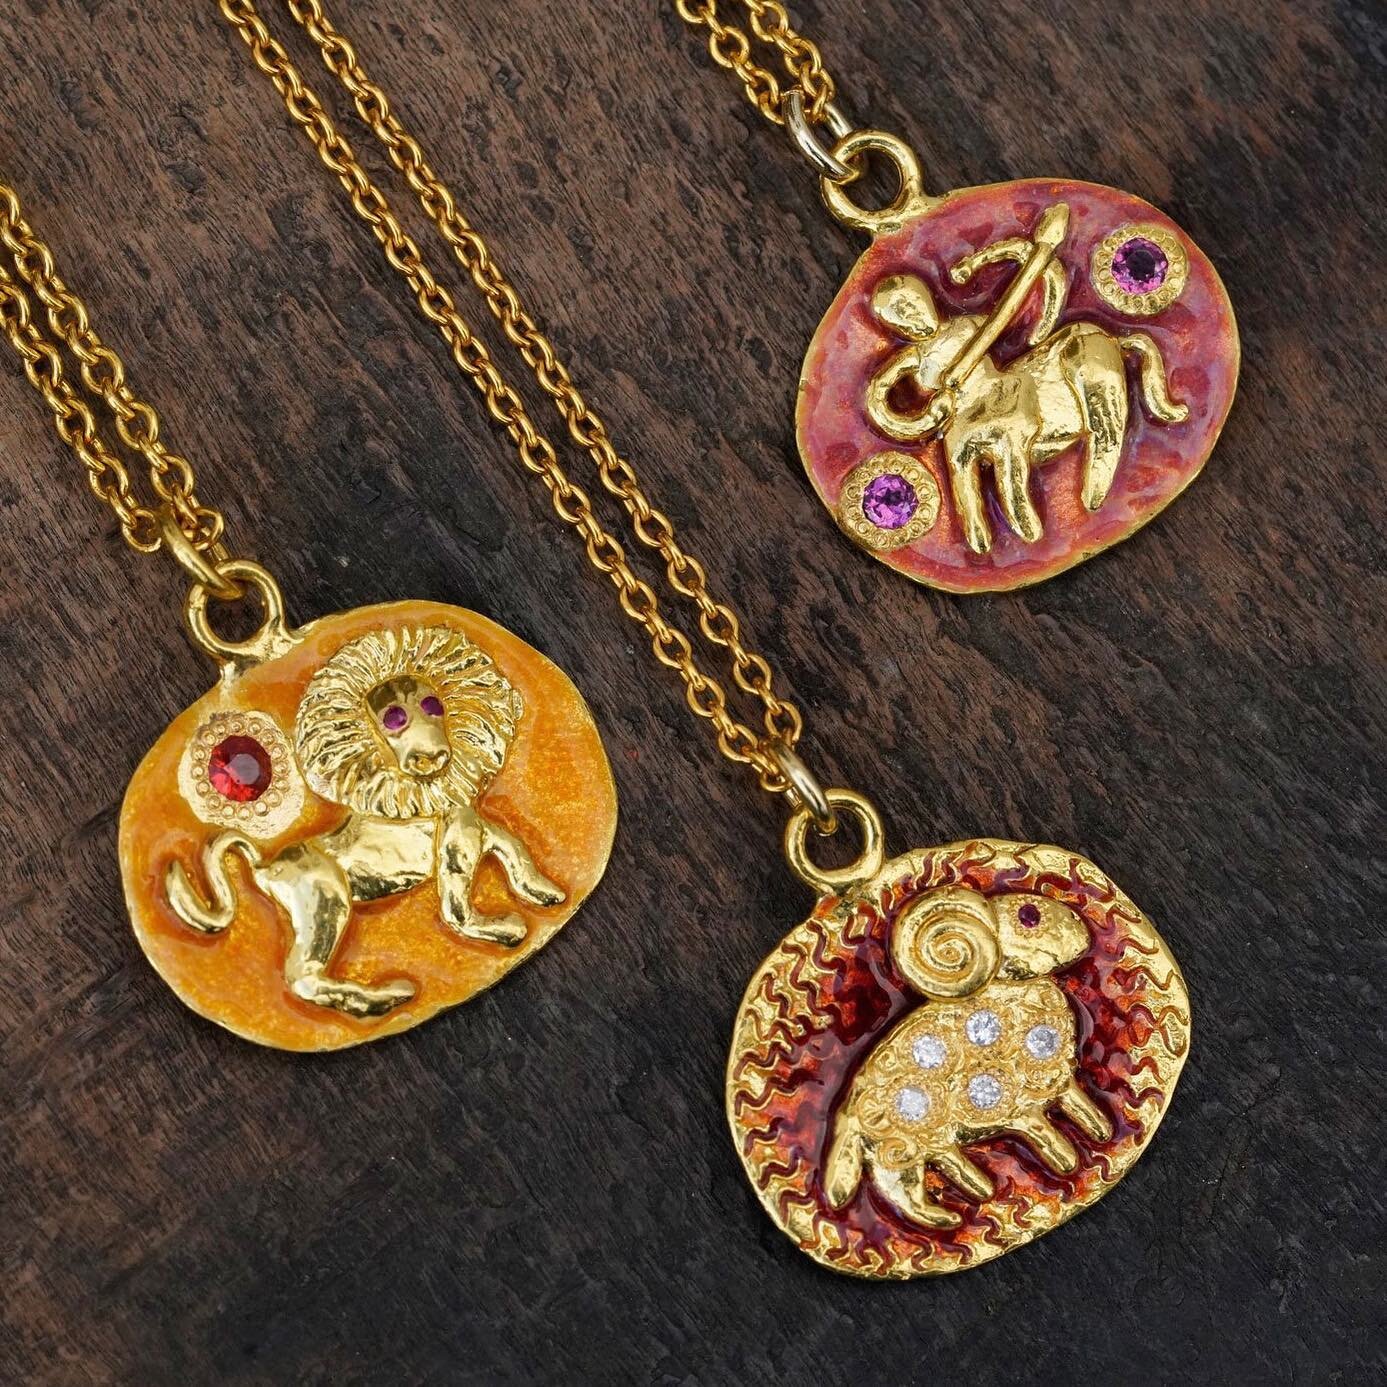 ZODIAC IS NOW ONLINE! 💫We are happy to present you our newest collection of necklaces, inspired by the magic of the Sun, Moon and Stars.

Our homage to one of the oldest human symbology. ~ Twelve disks in yellow 22k gold, reminiscent of miniature ic